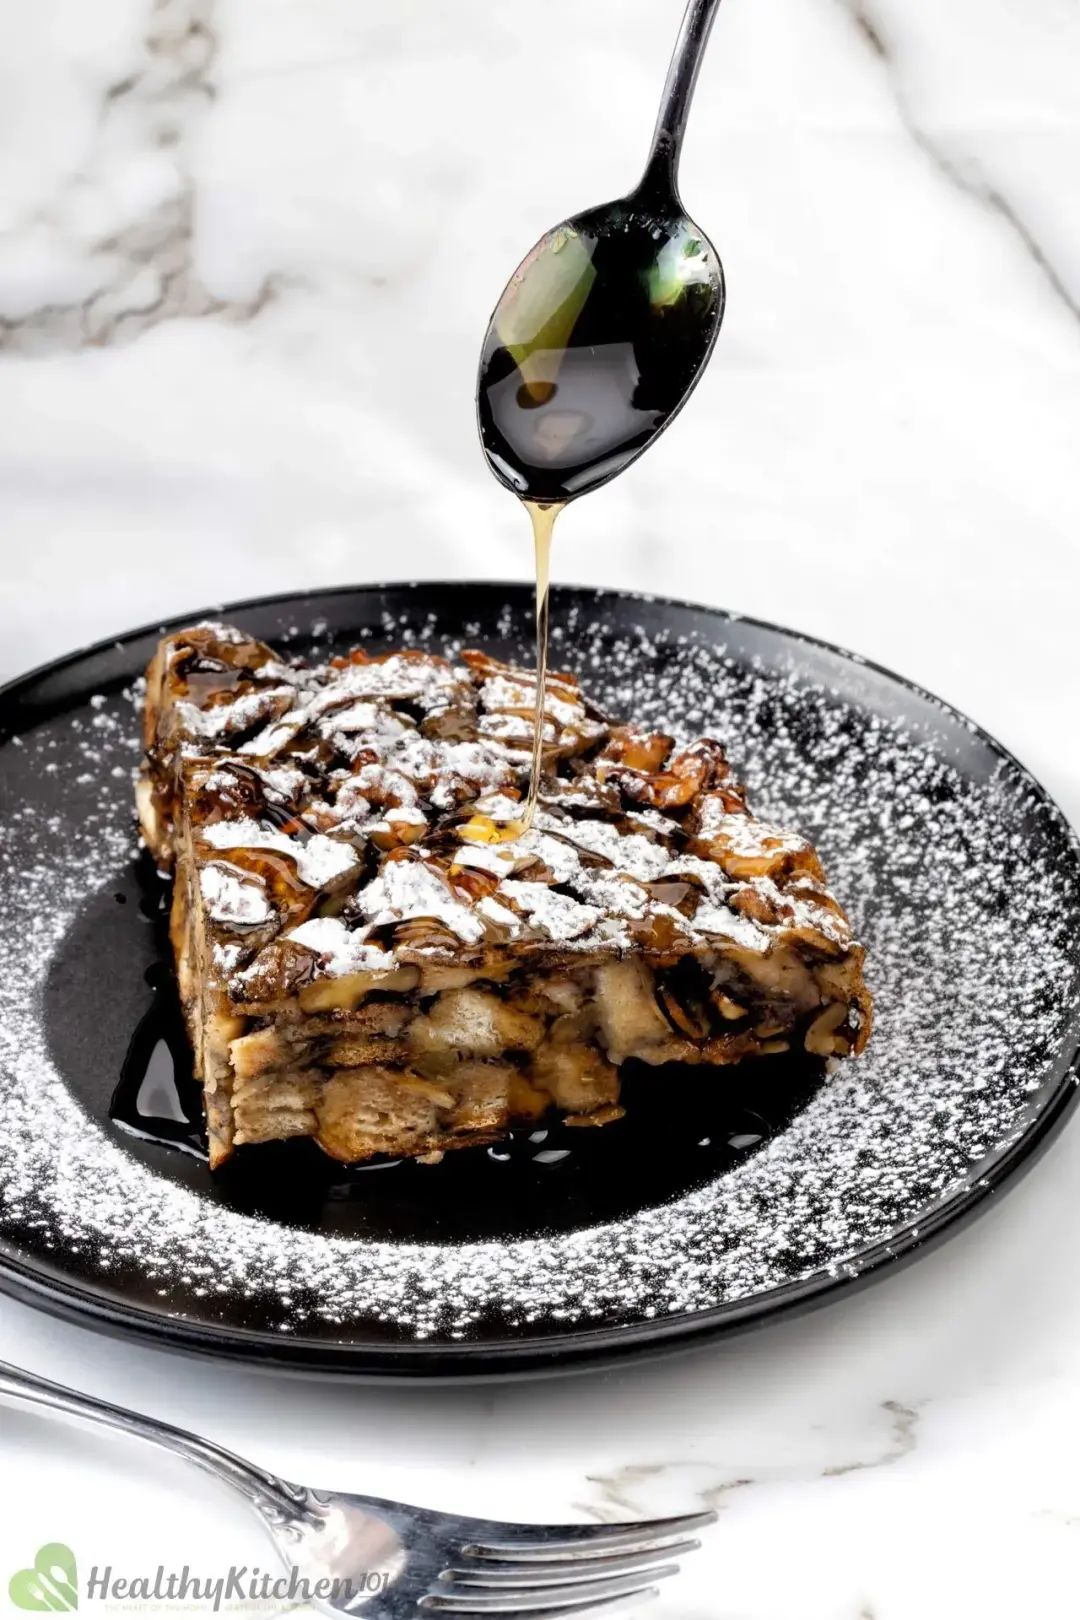 A black plate of French toast casserole dusted with powdered sugar, drizzled with maply syrup on top